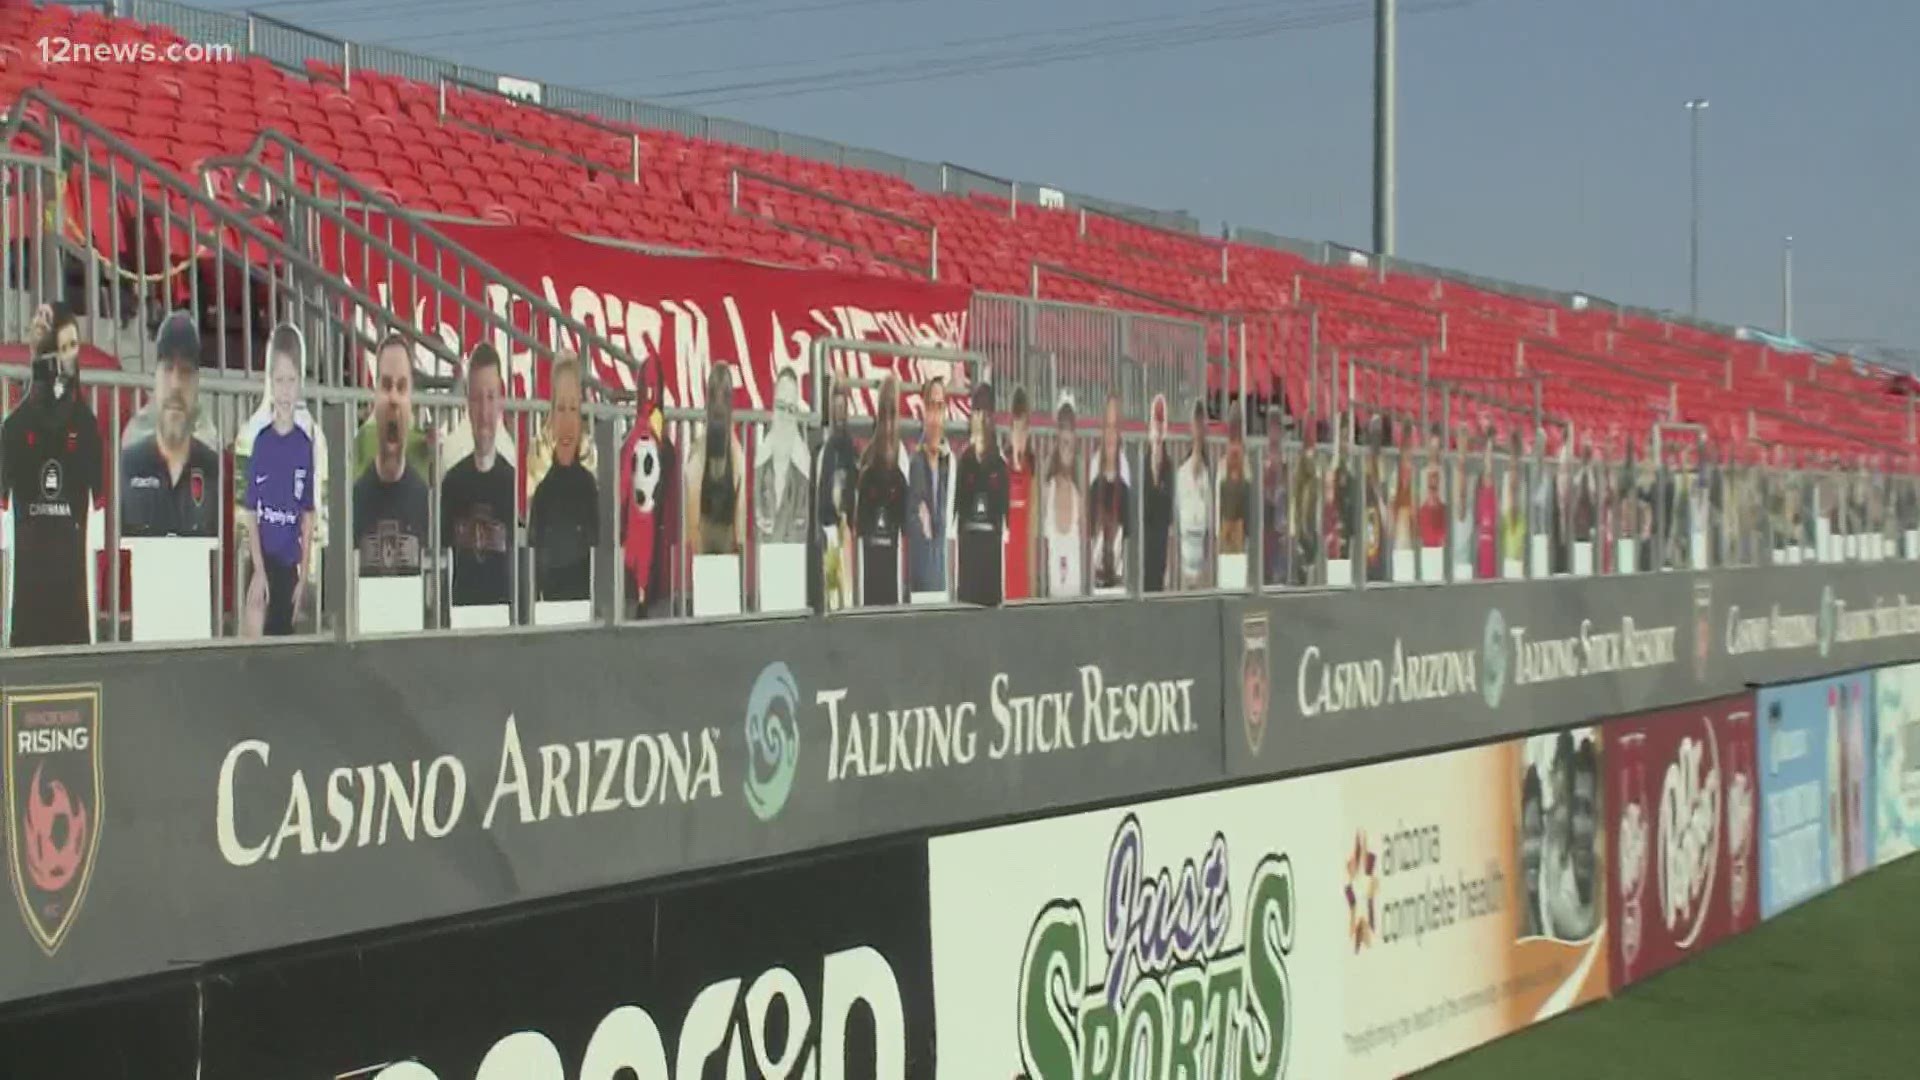 Phoenix Rising FC will head to the pitch, although without fans, in the city's first professional sporting event since the pandemic began.